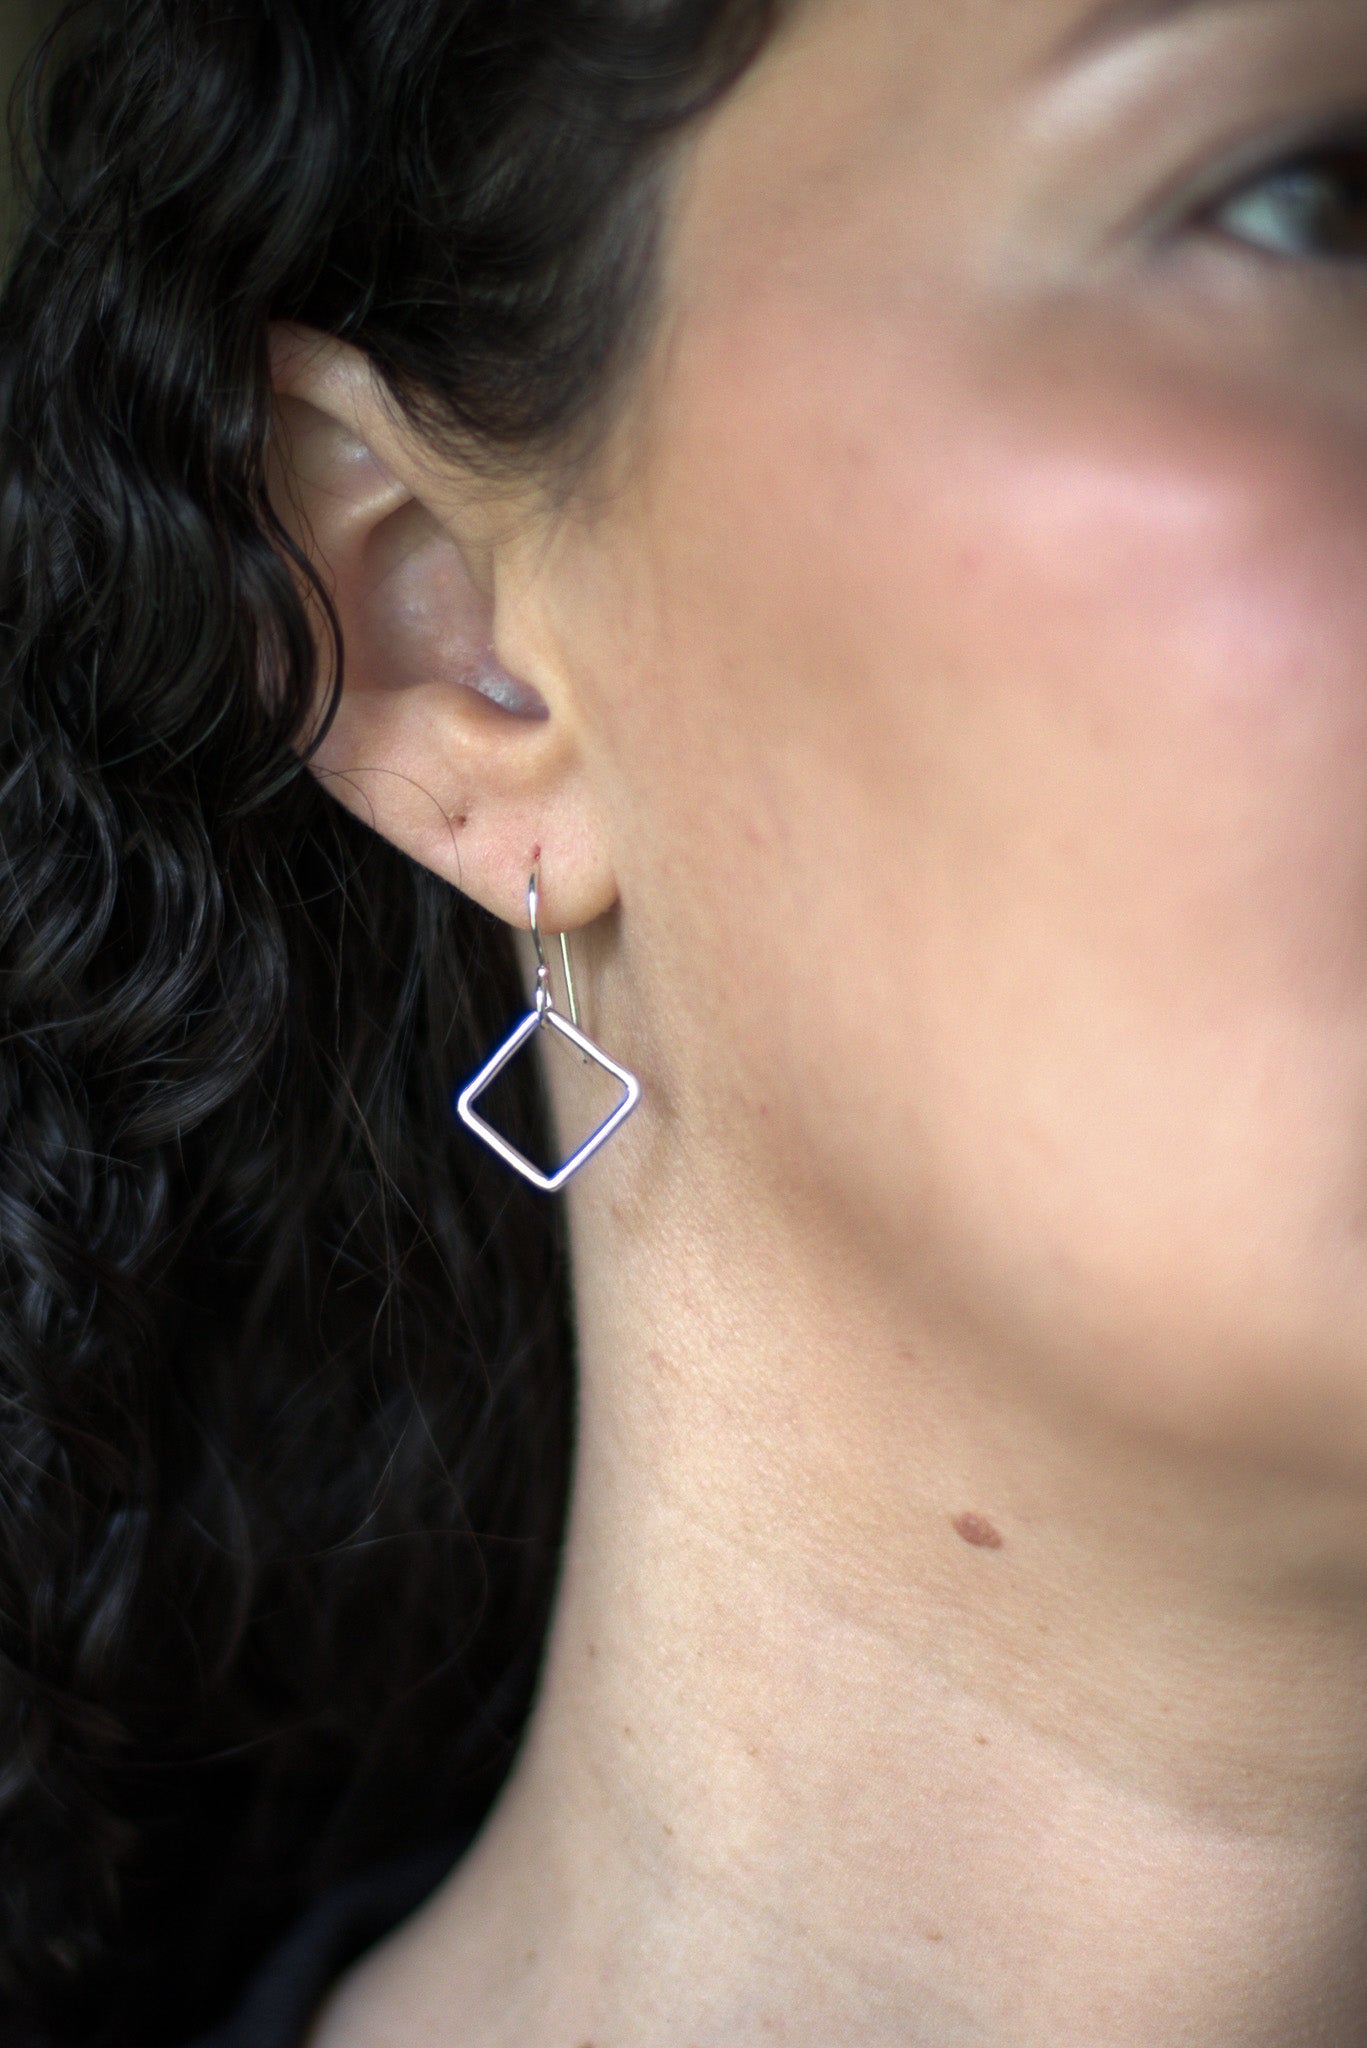 Reminders of the power of breathwork in dainty earrings using the box breathing technique